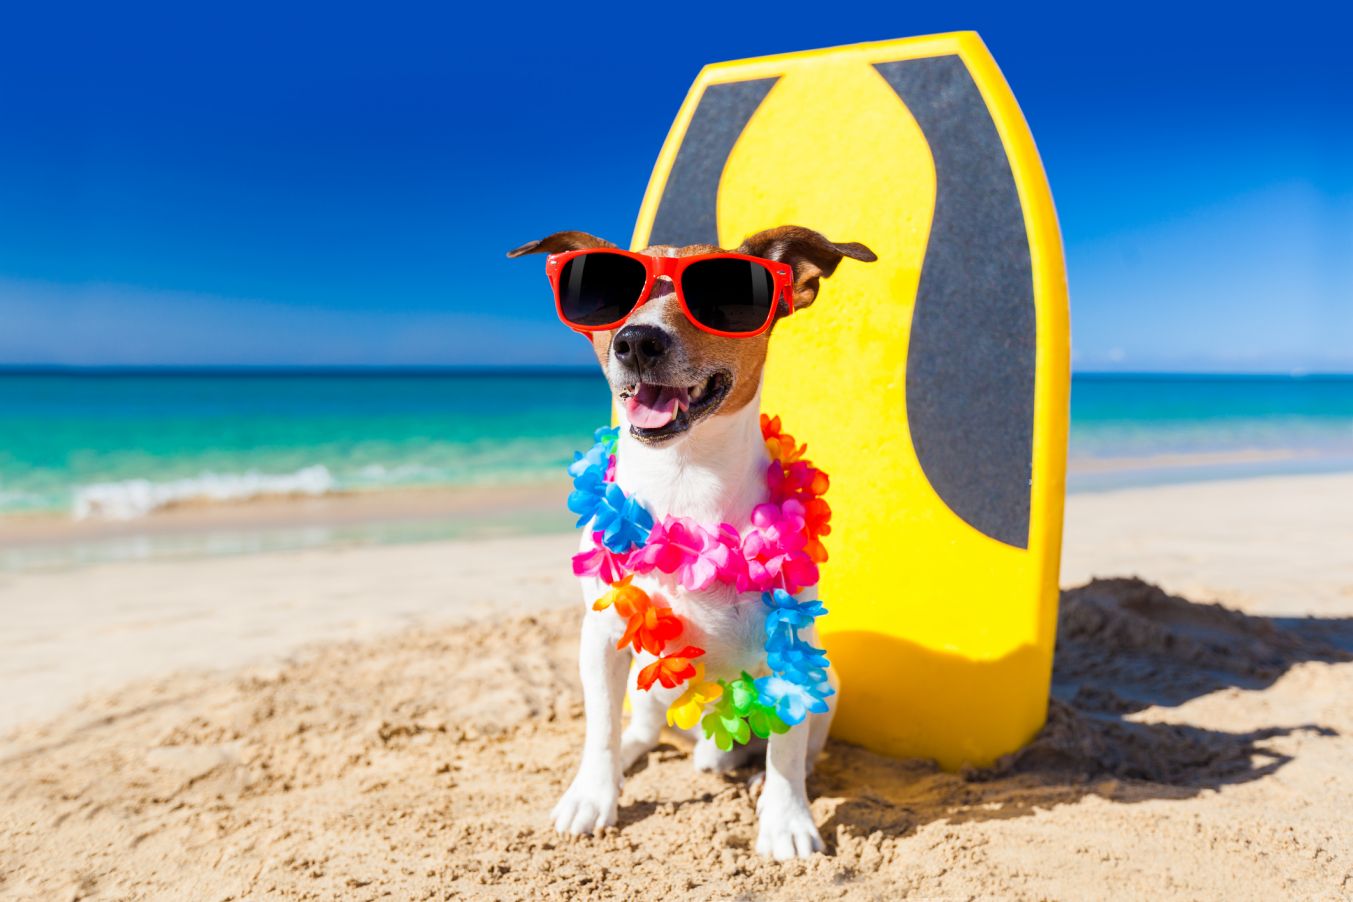 travel to hawaii with a dog